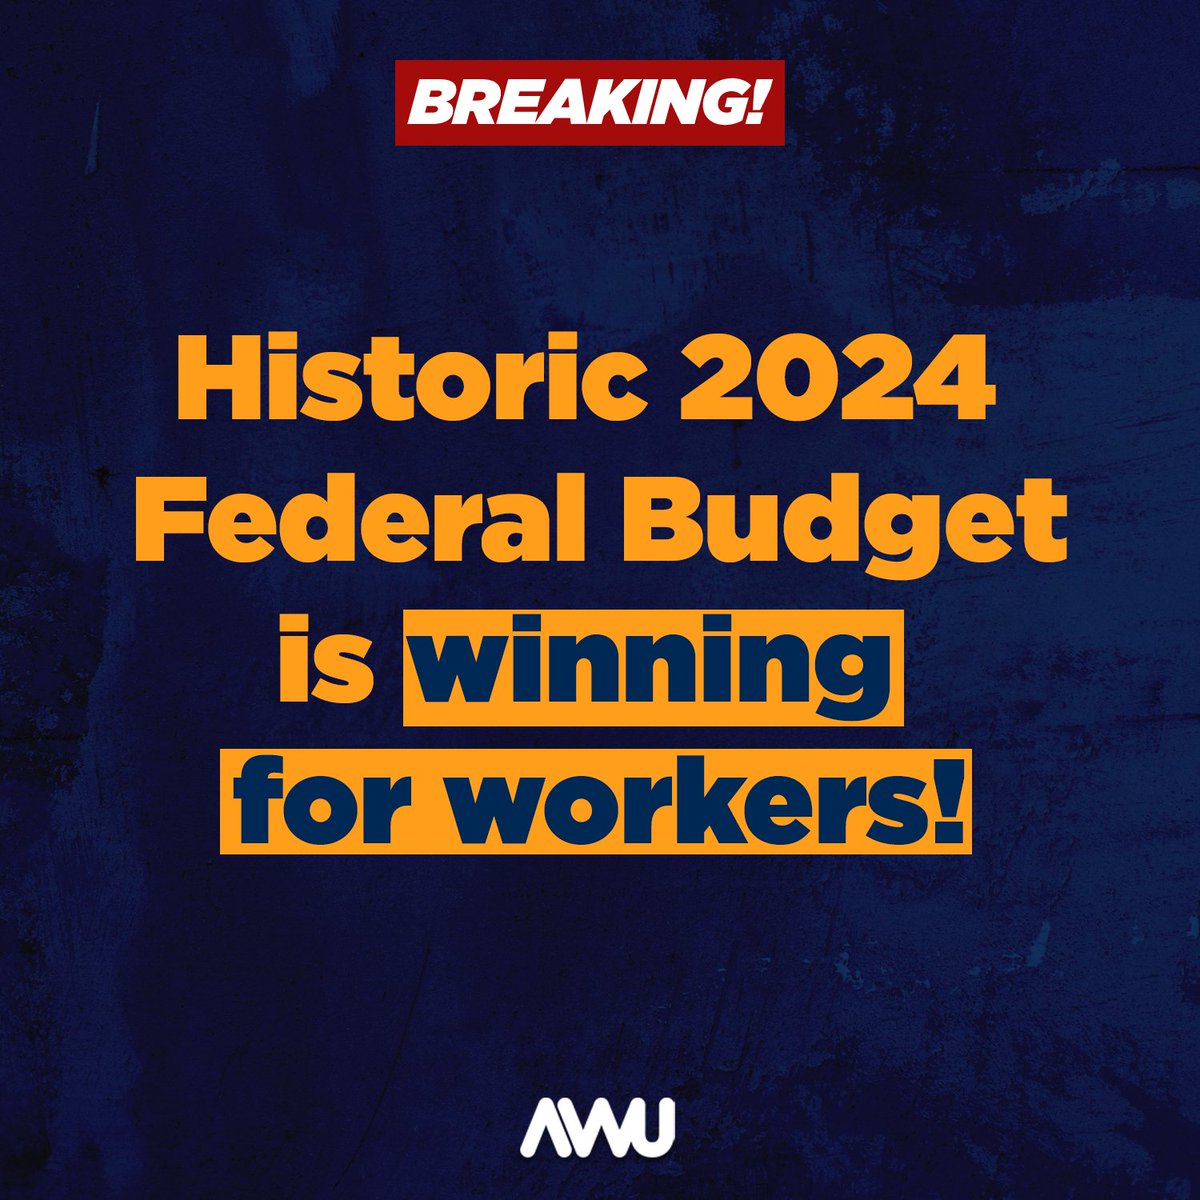 The Albanese Government's historic 2024 budget delivers for working Australians:

🏭 $22.7B for emerging clean manufacturing industries under the Future Made in Australia Program

#AWU #AWUnion #ausunions #auspol #budget2024